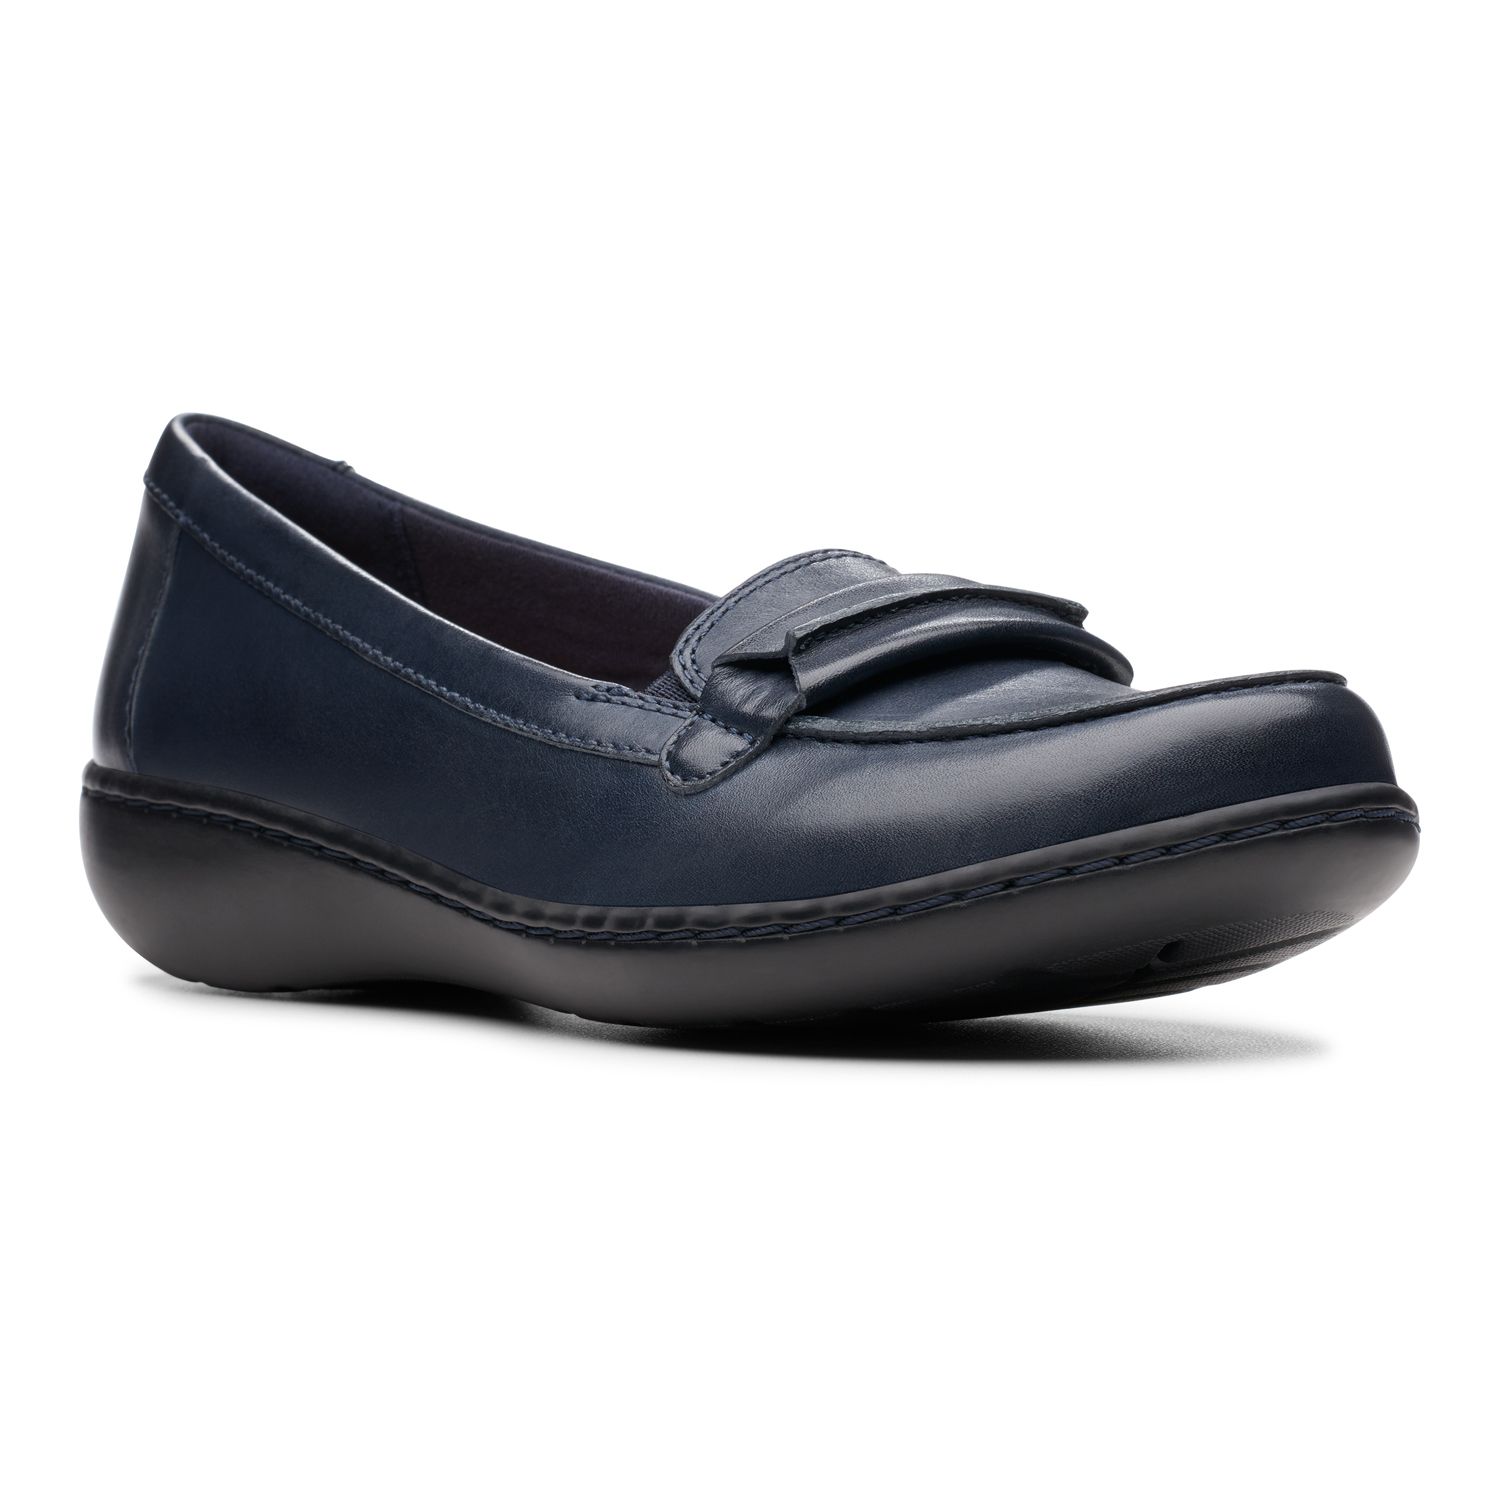 clarks shoes womens wide